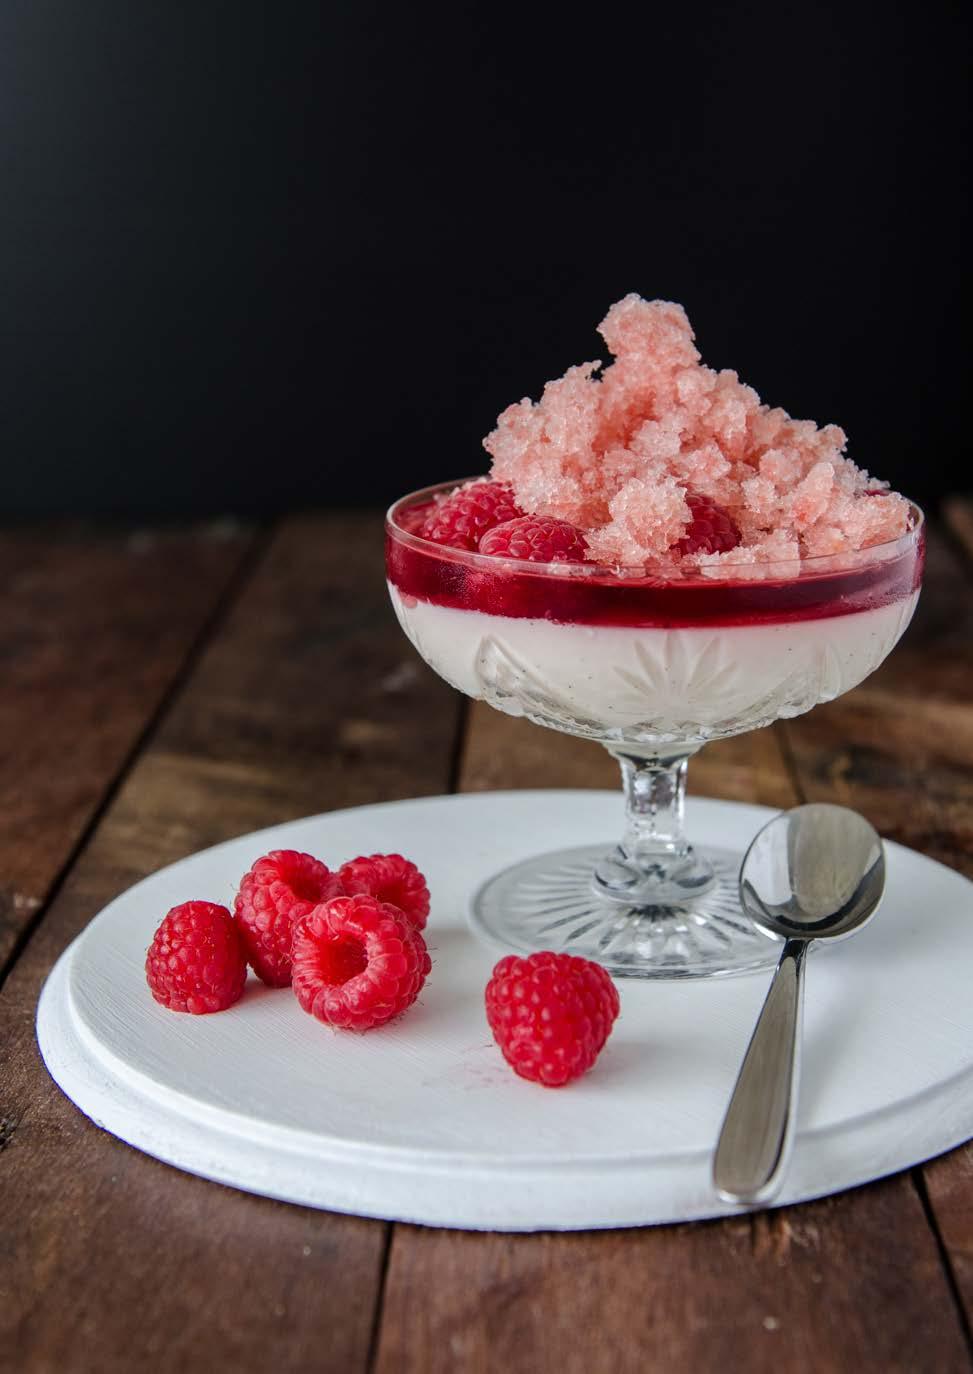 This icy cold panna cotta will cool